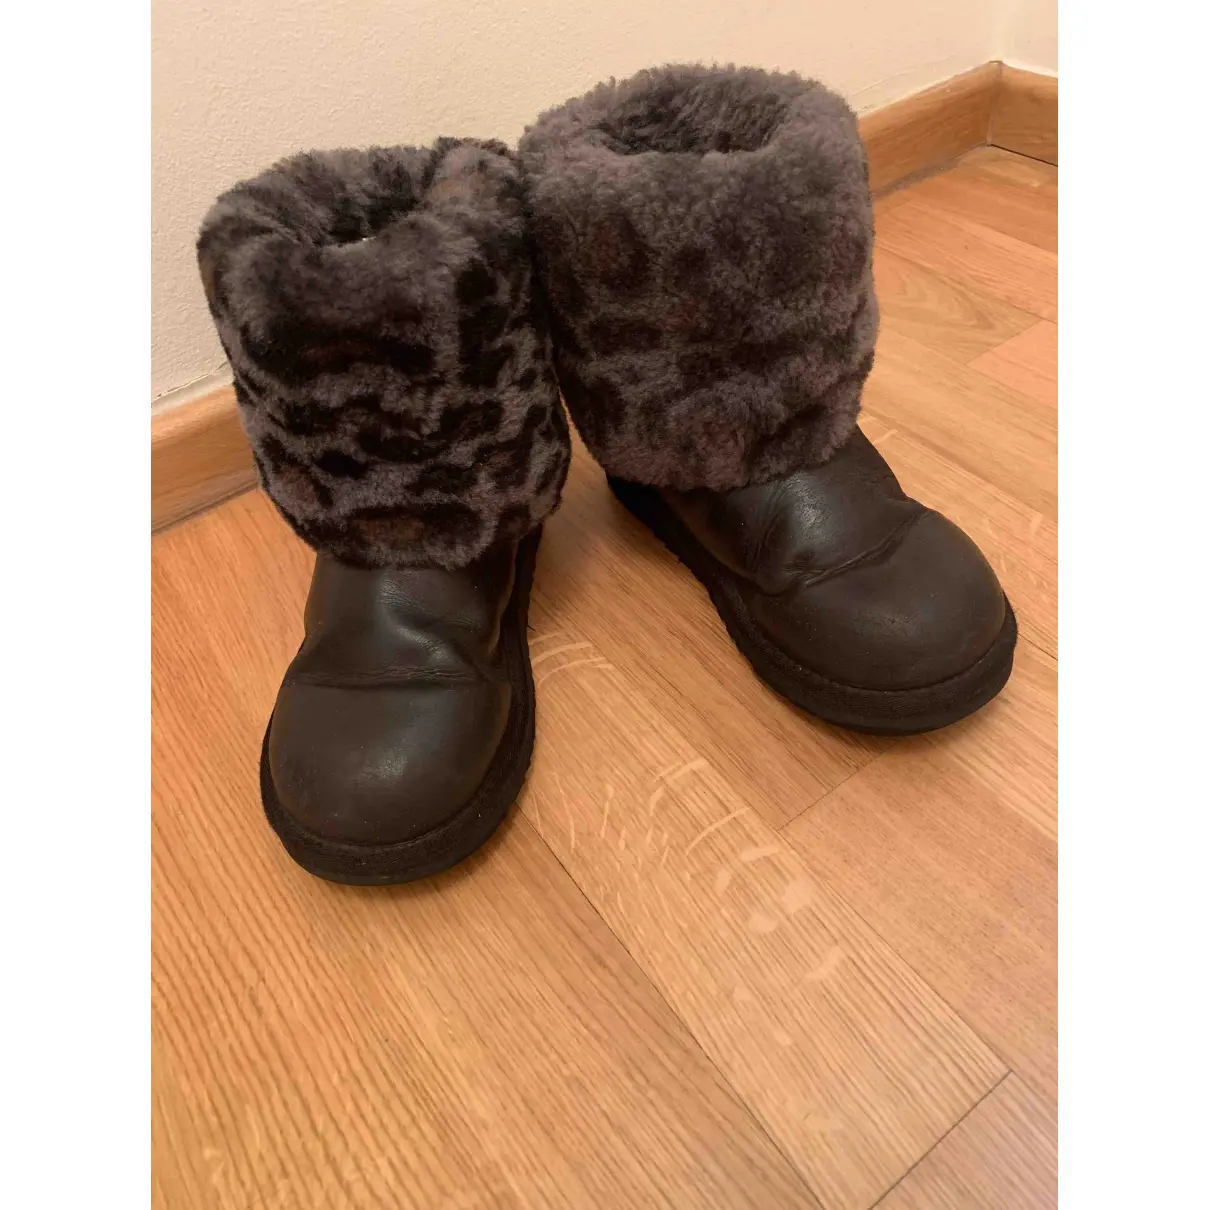 Buy Ugg Leather boots online